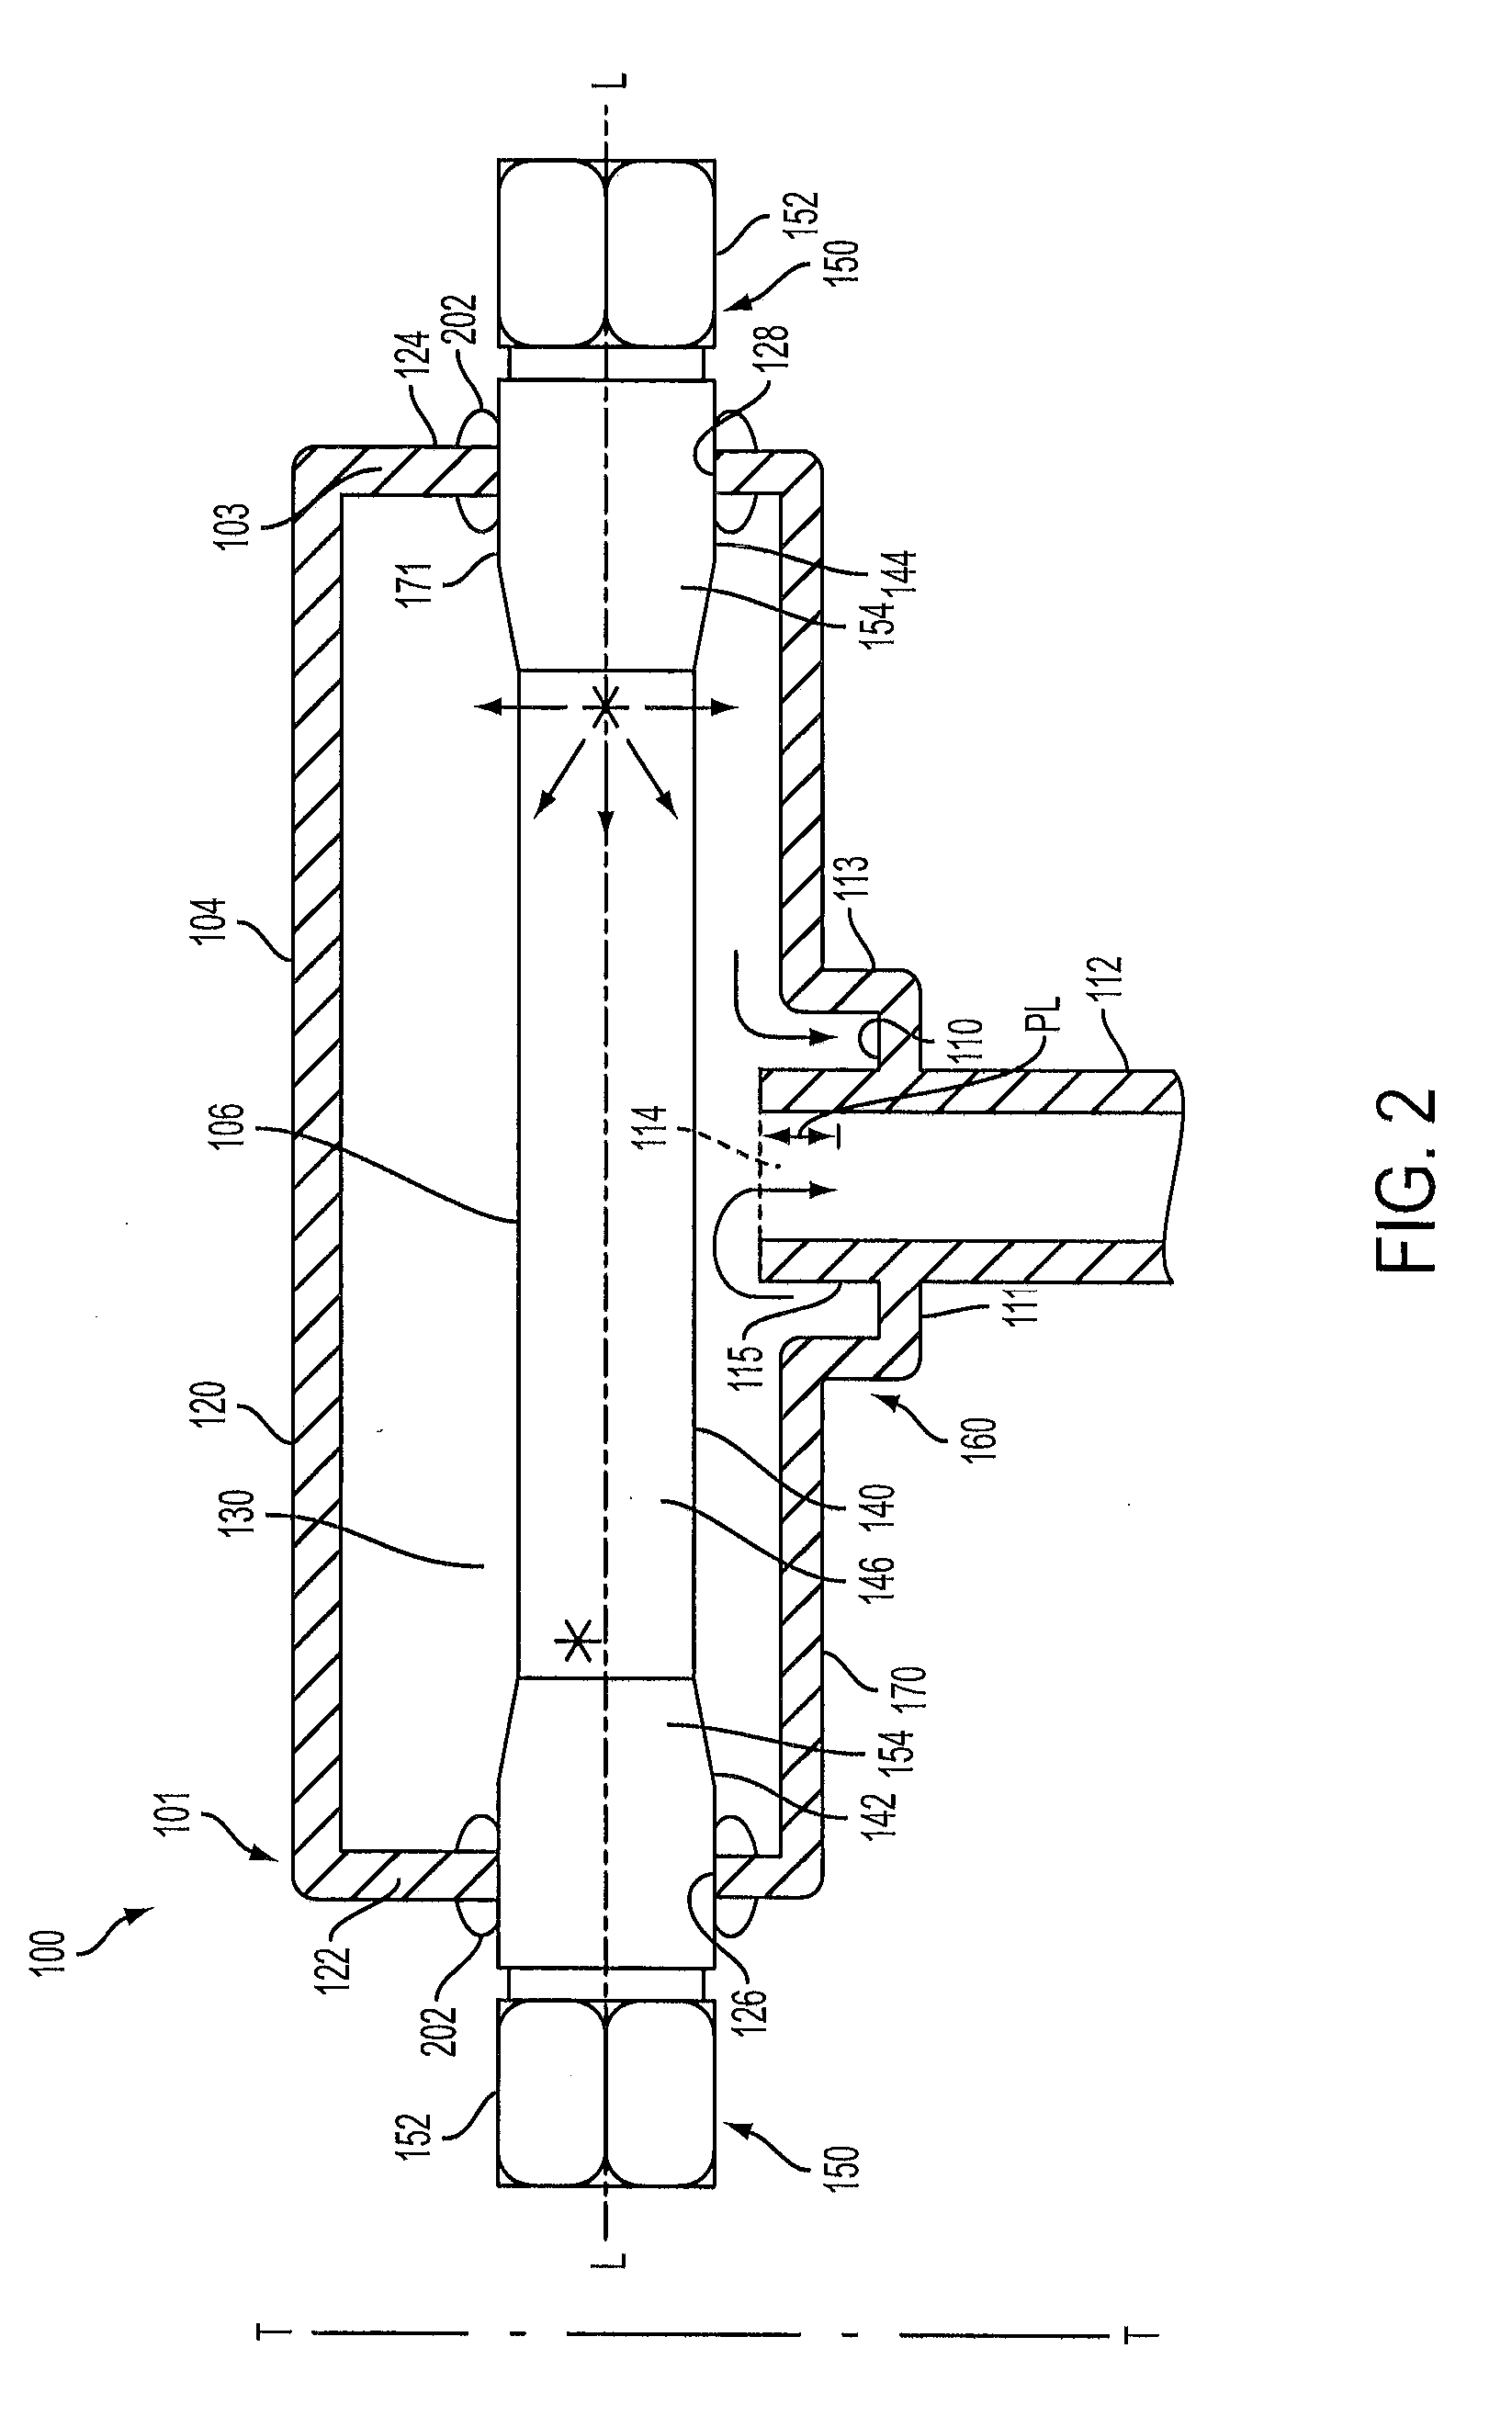 Device for detecting and isolating fuel leaks in a vehicle